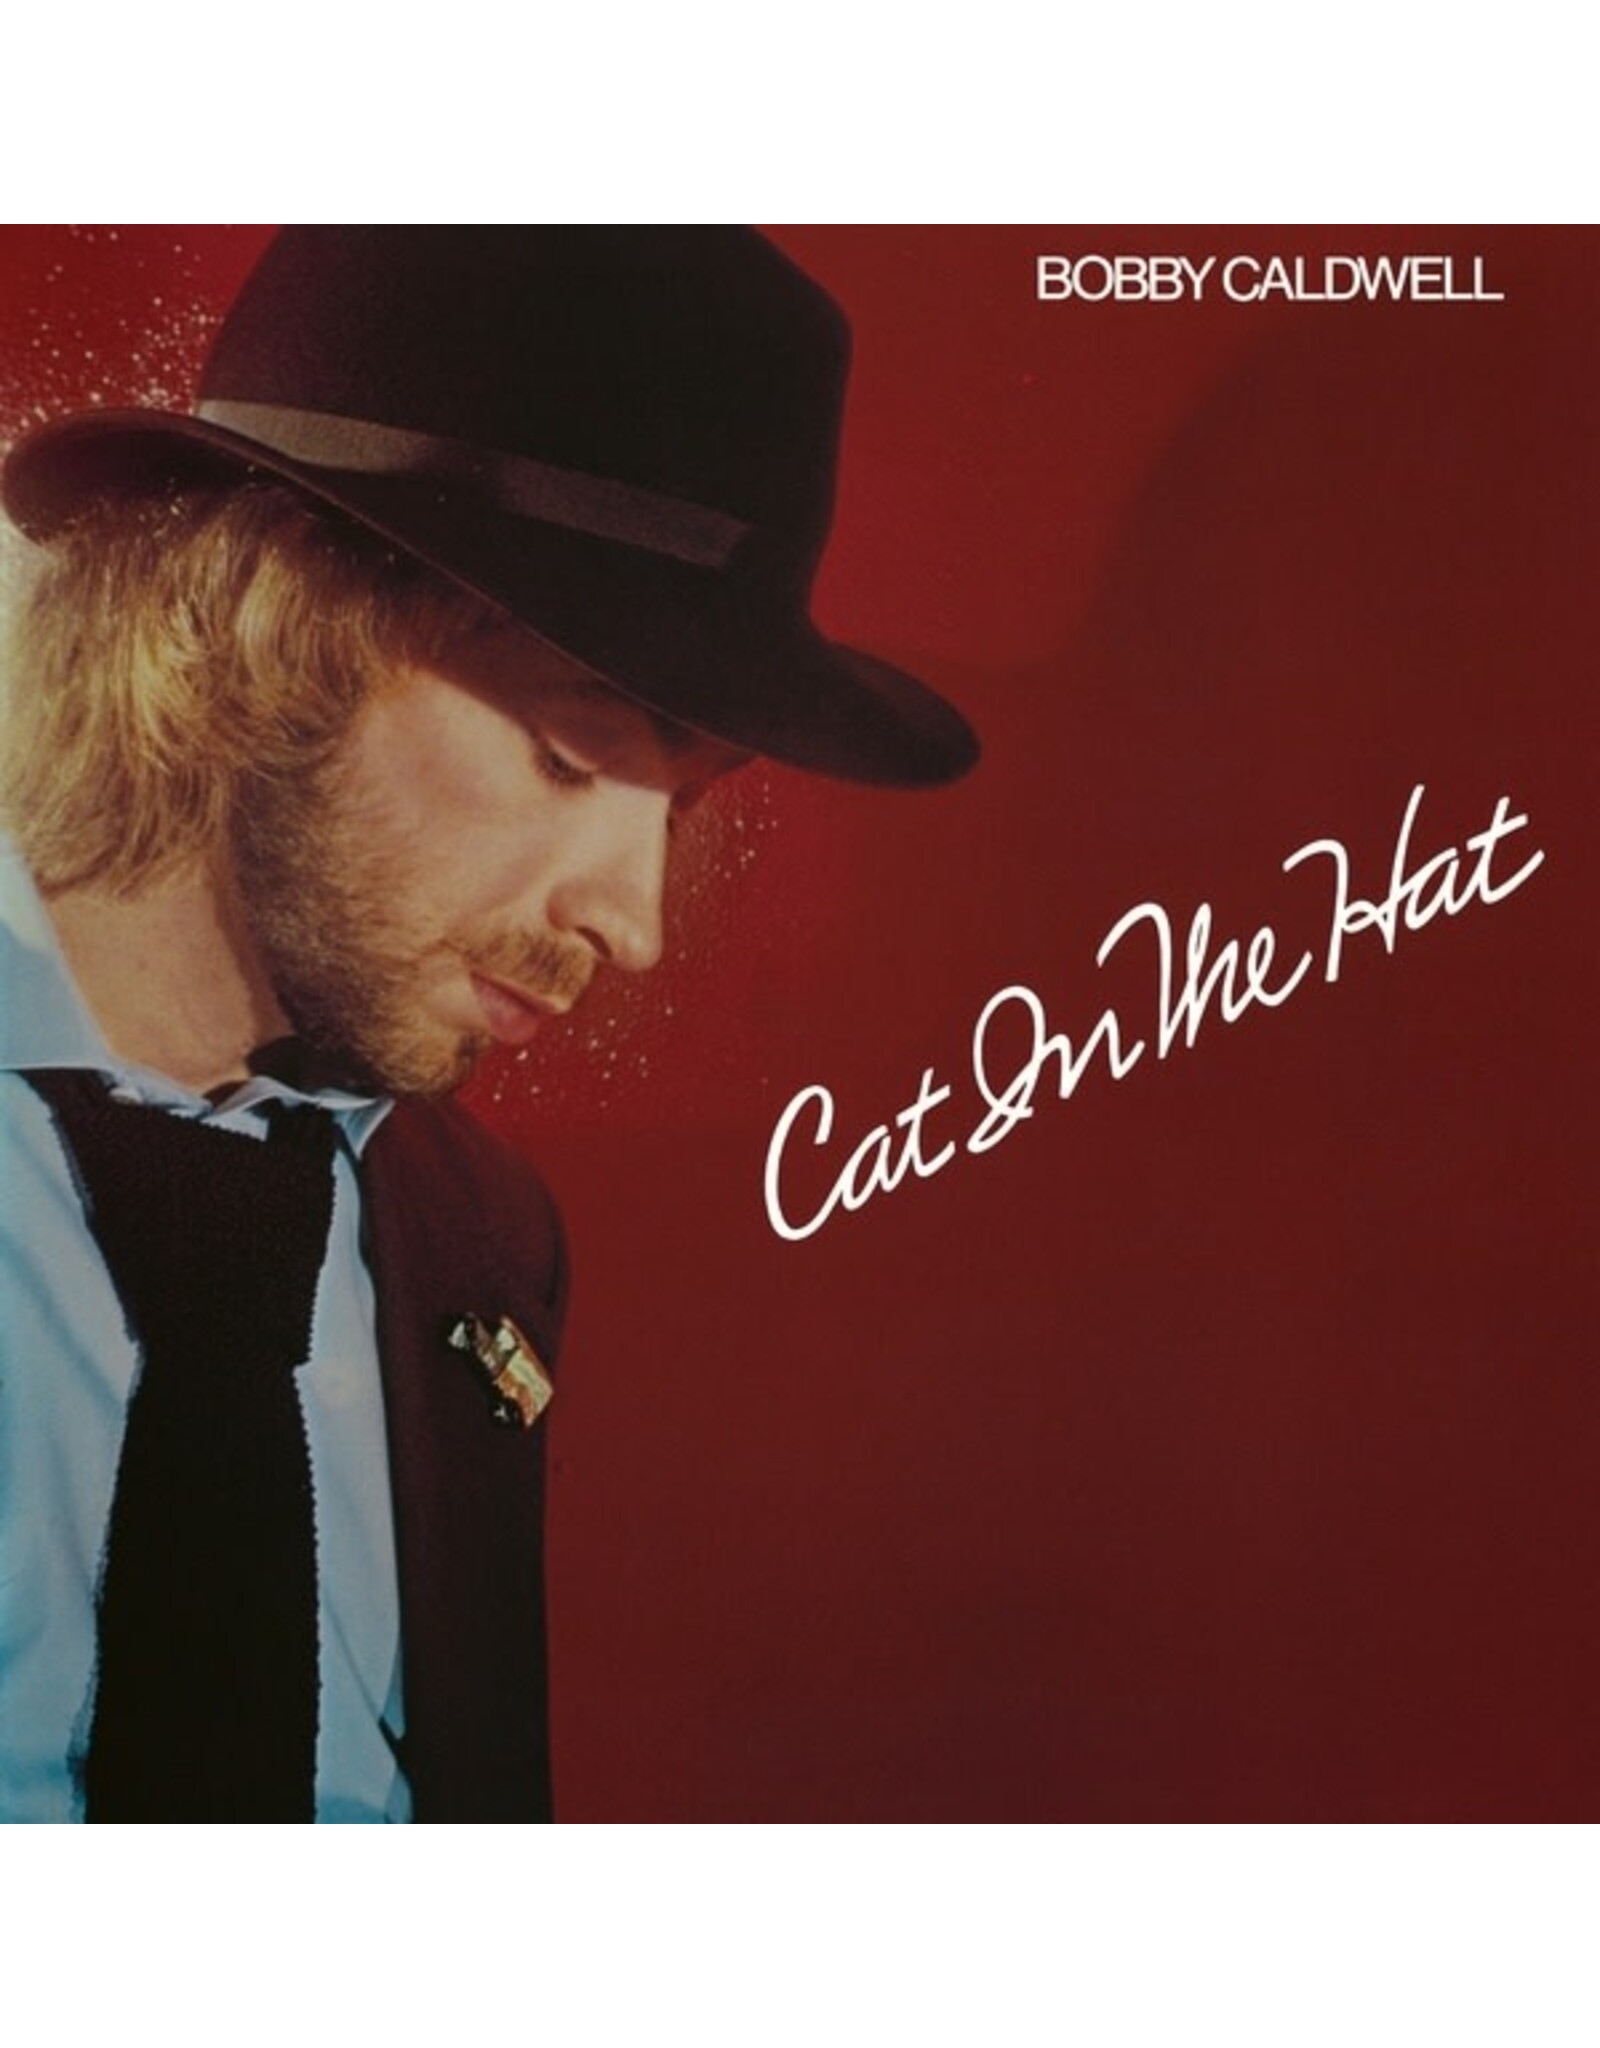 Be With Caldwell, Bobby: Cat In The Hat LP